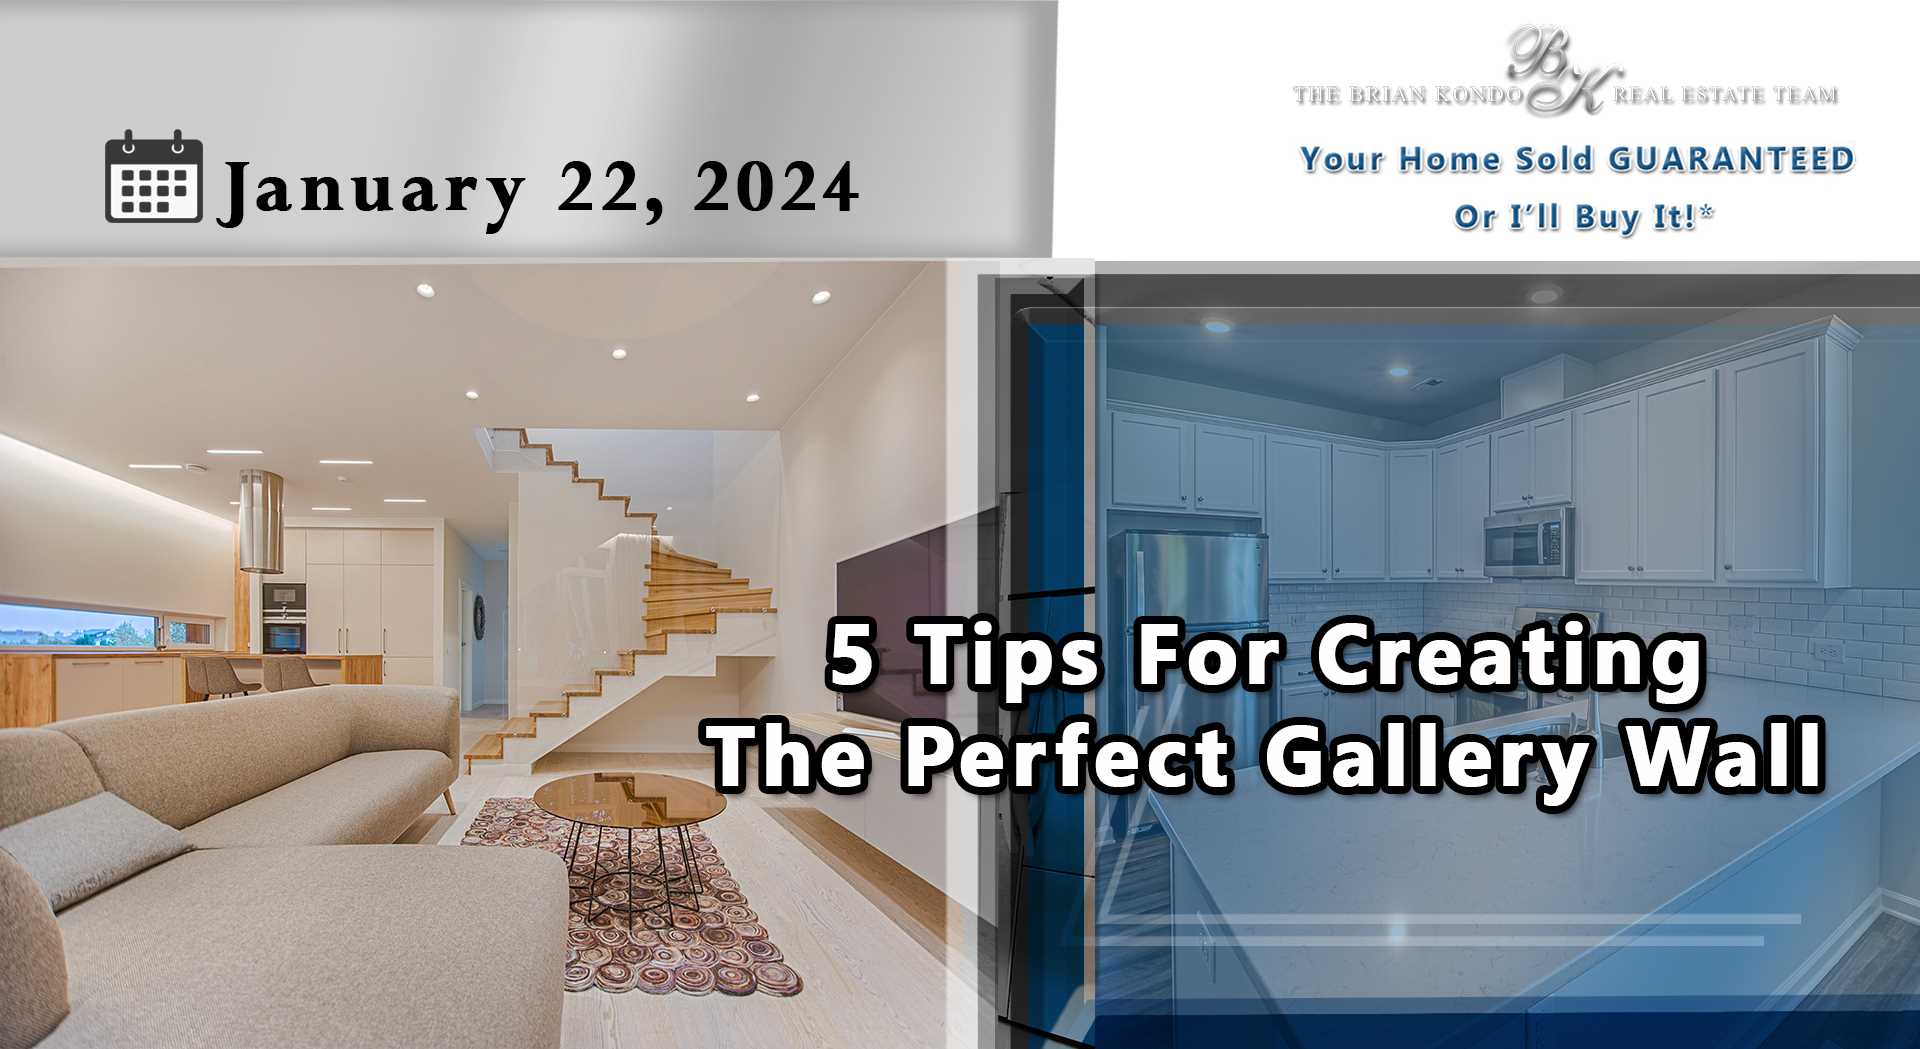 5 Tips For Creating The Perfect Gallery Wall